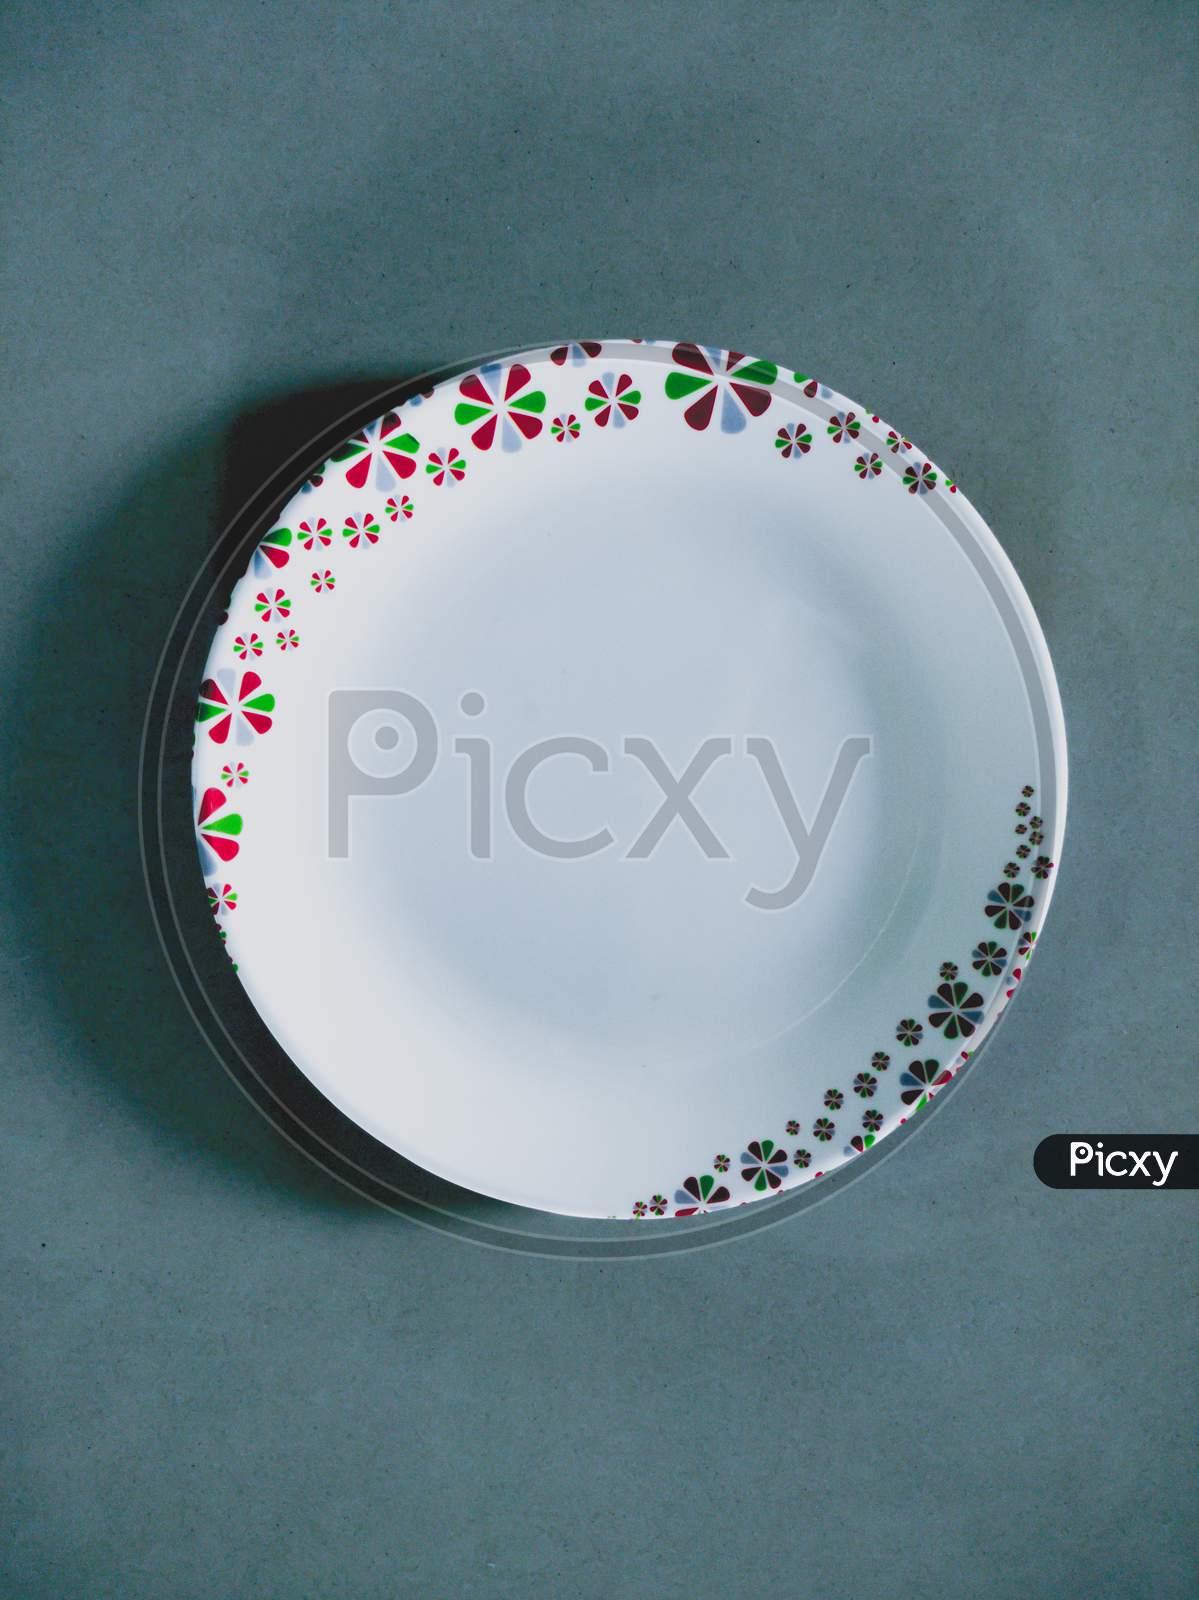 Beautiful and colourful plate with blueish background.